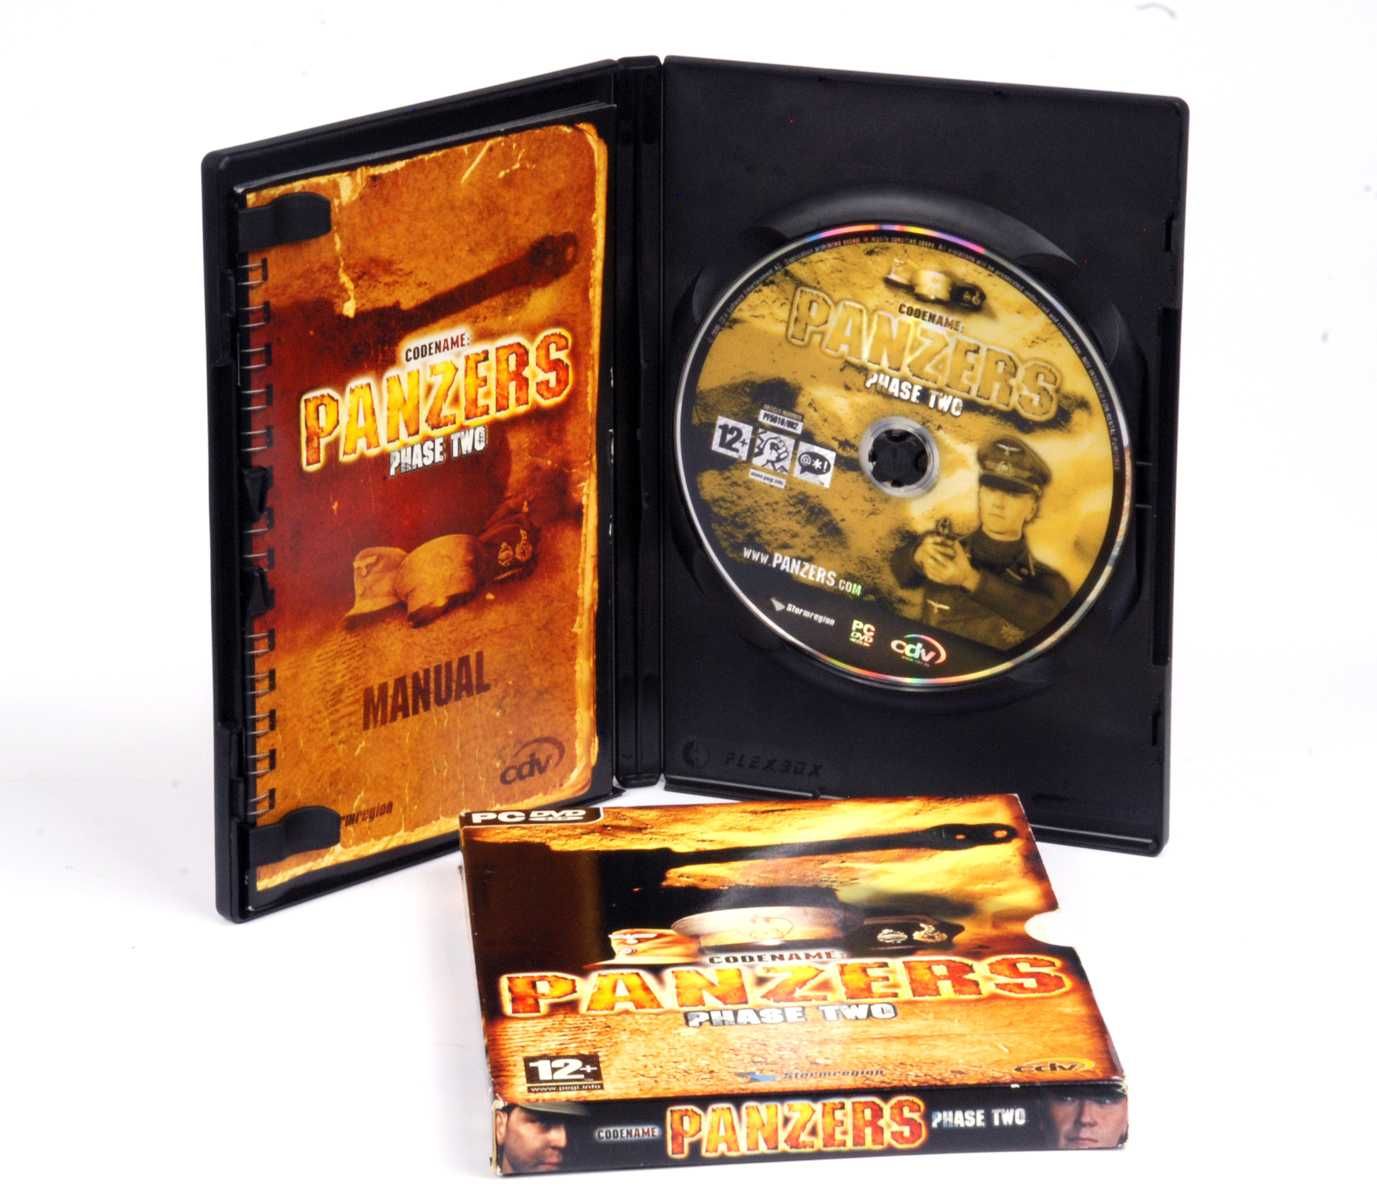 Codename: Panzers - Phase Two PC